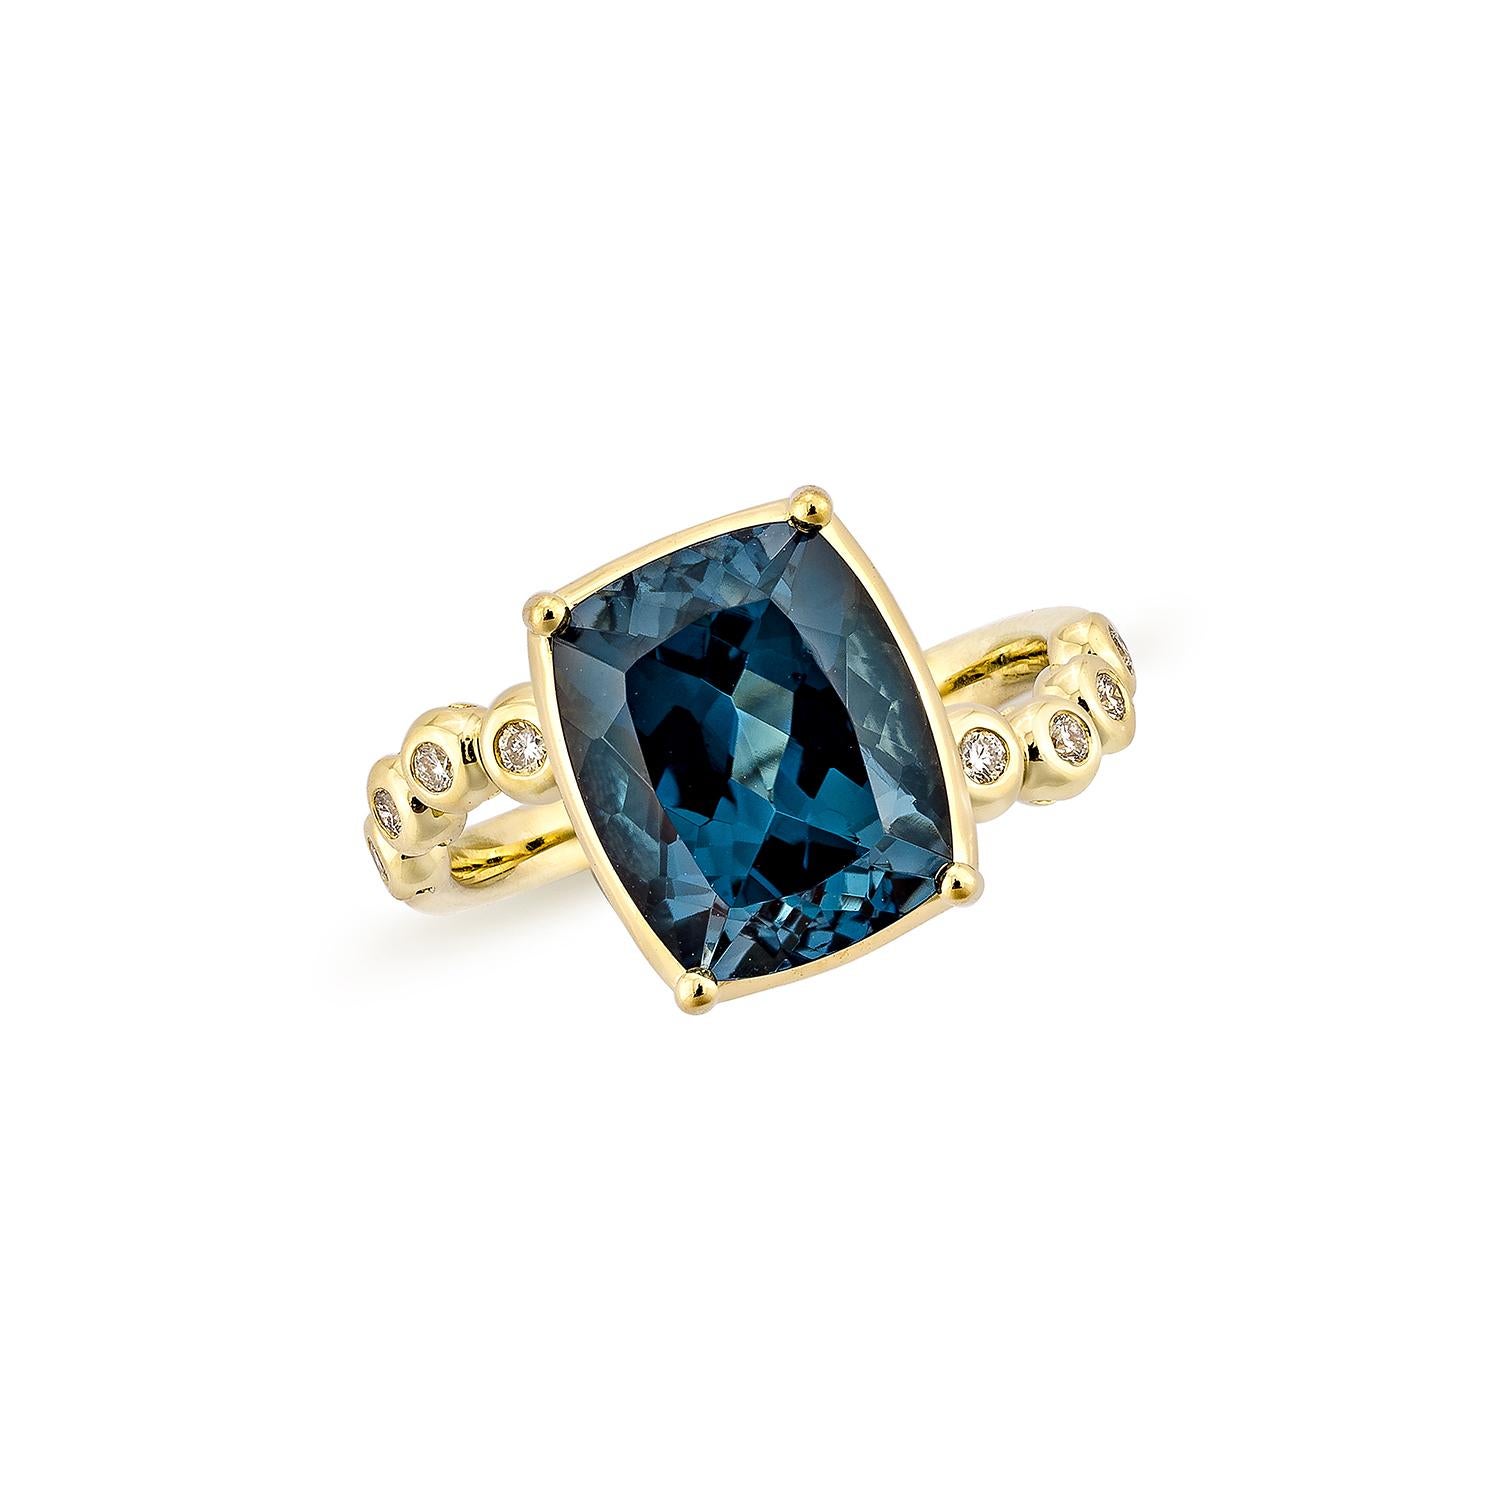 Contemporary 5.18 Carat London Blue Topaz Fancy Ring in 18Karat Yellow Gold with Diamond. For Sale